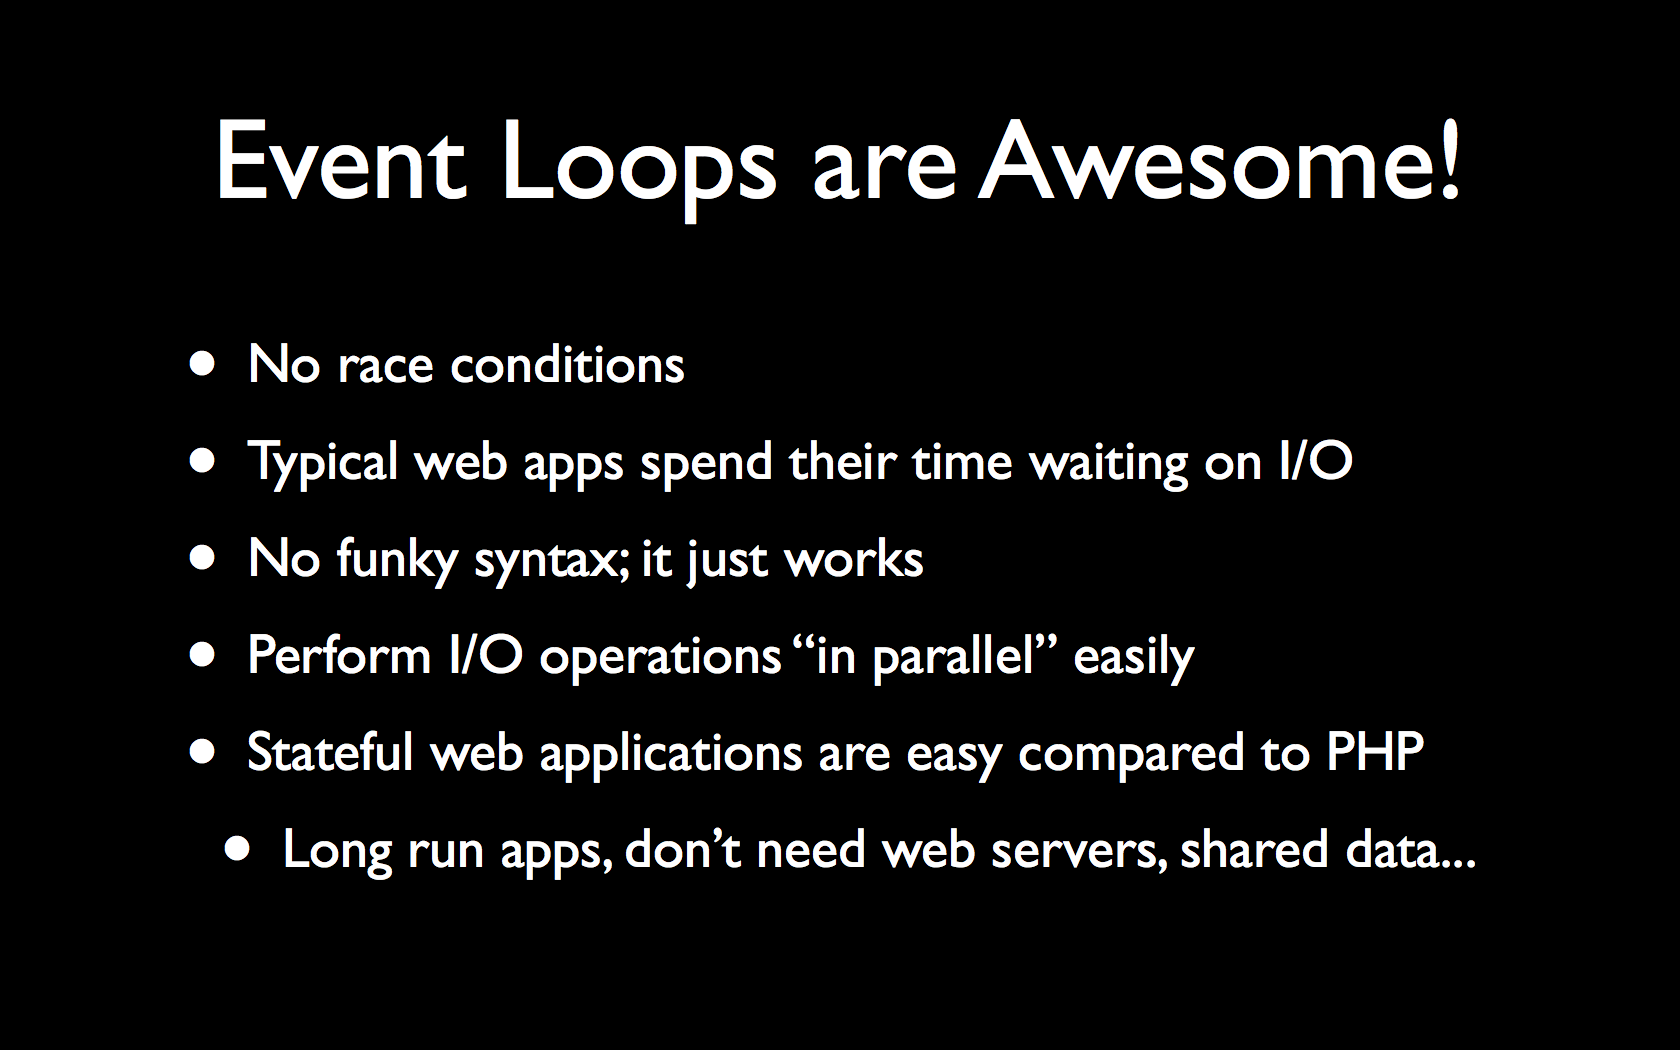 The JavaScript Event Loop: Event Loops are Awesome